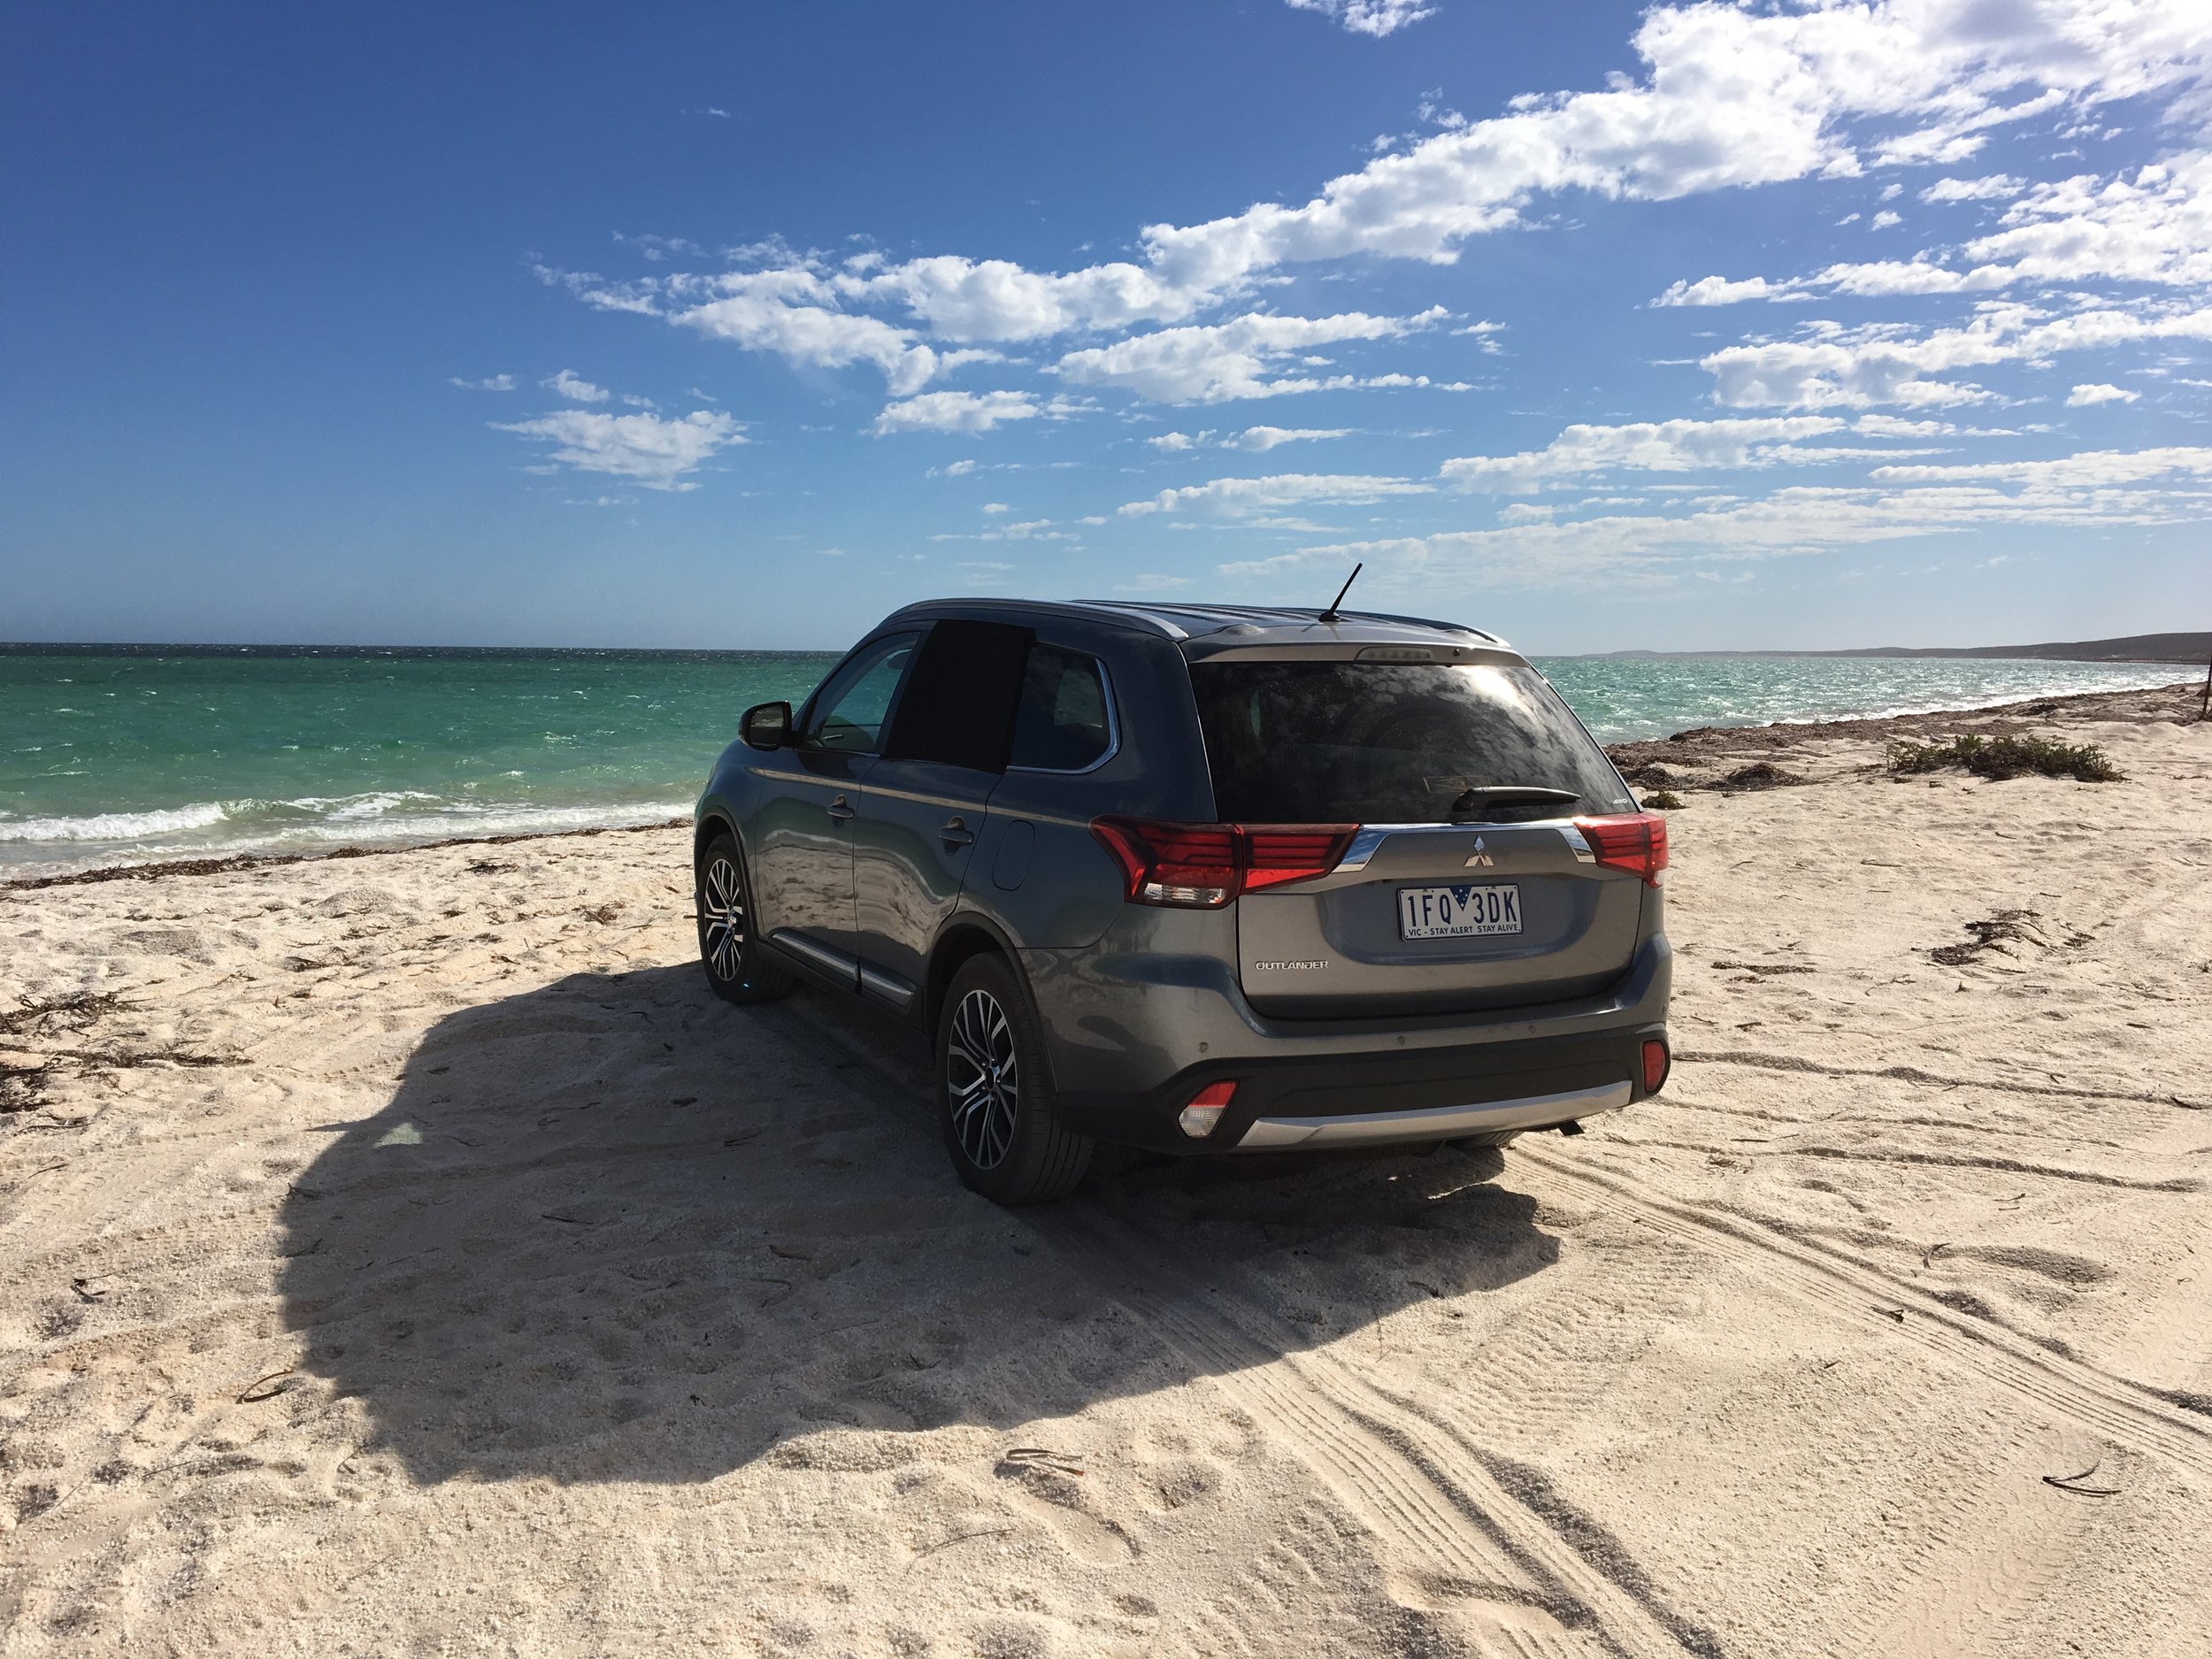 Driving right on the beach